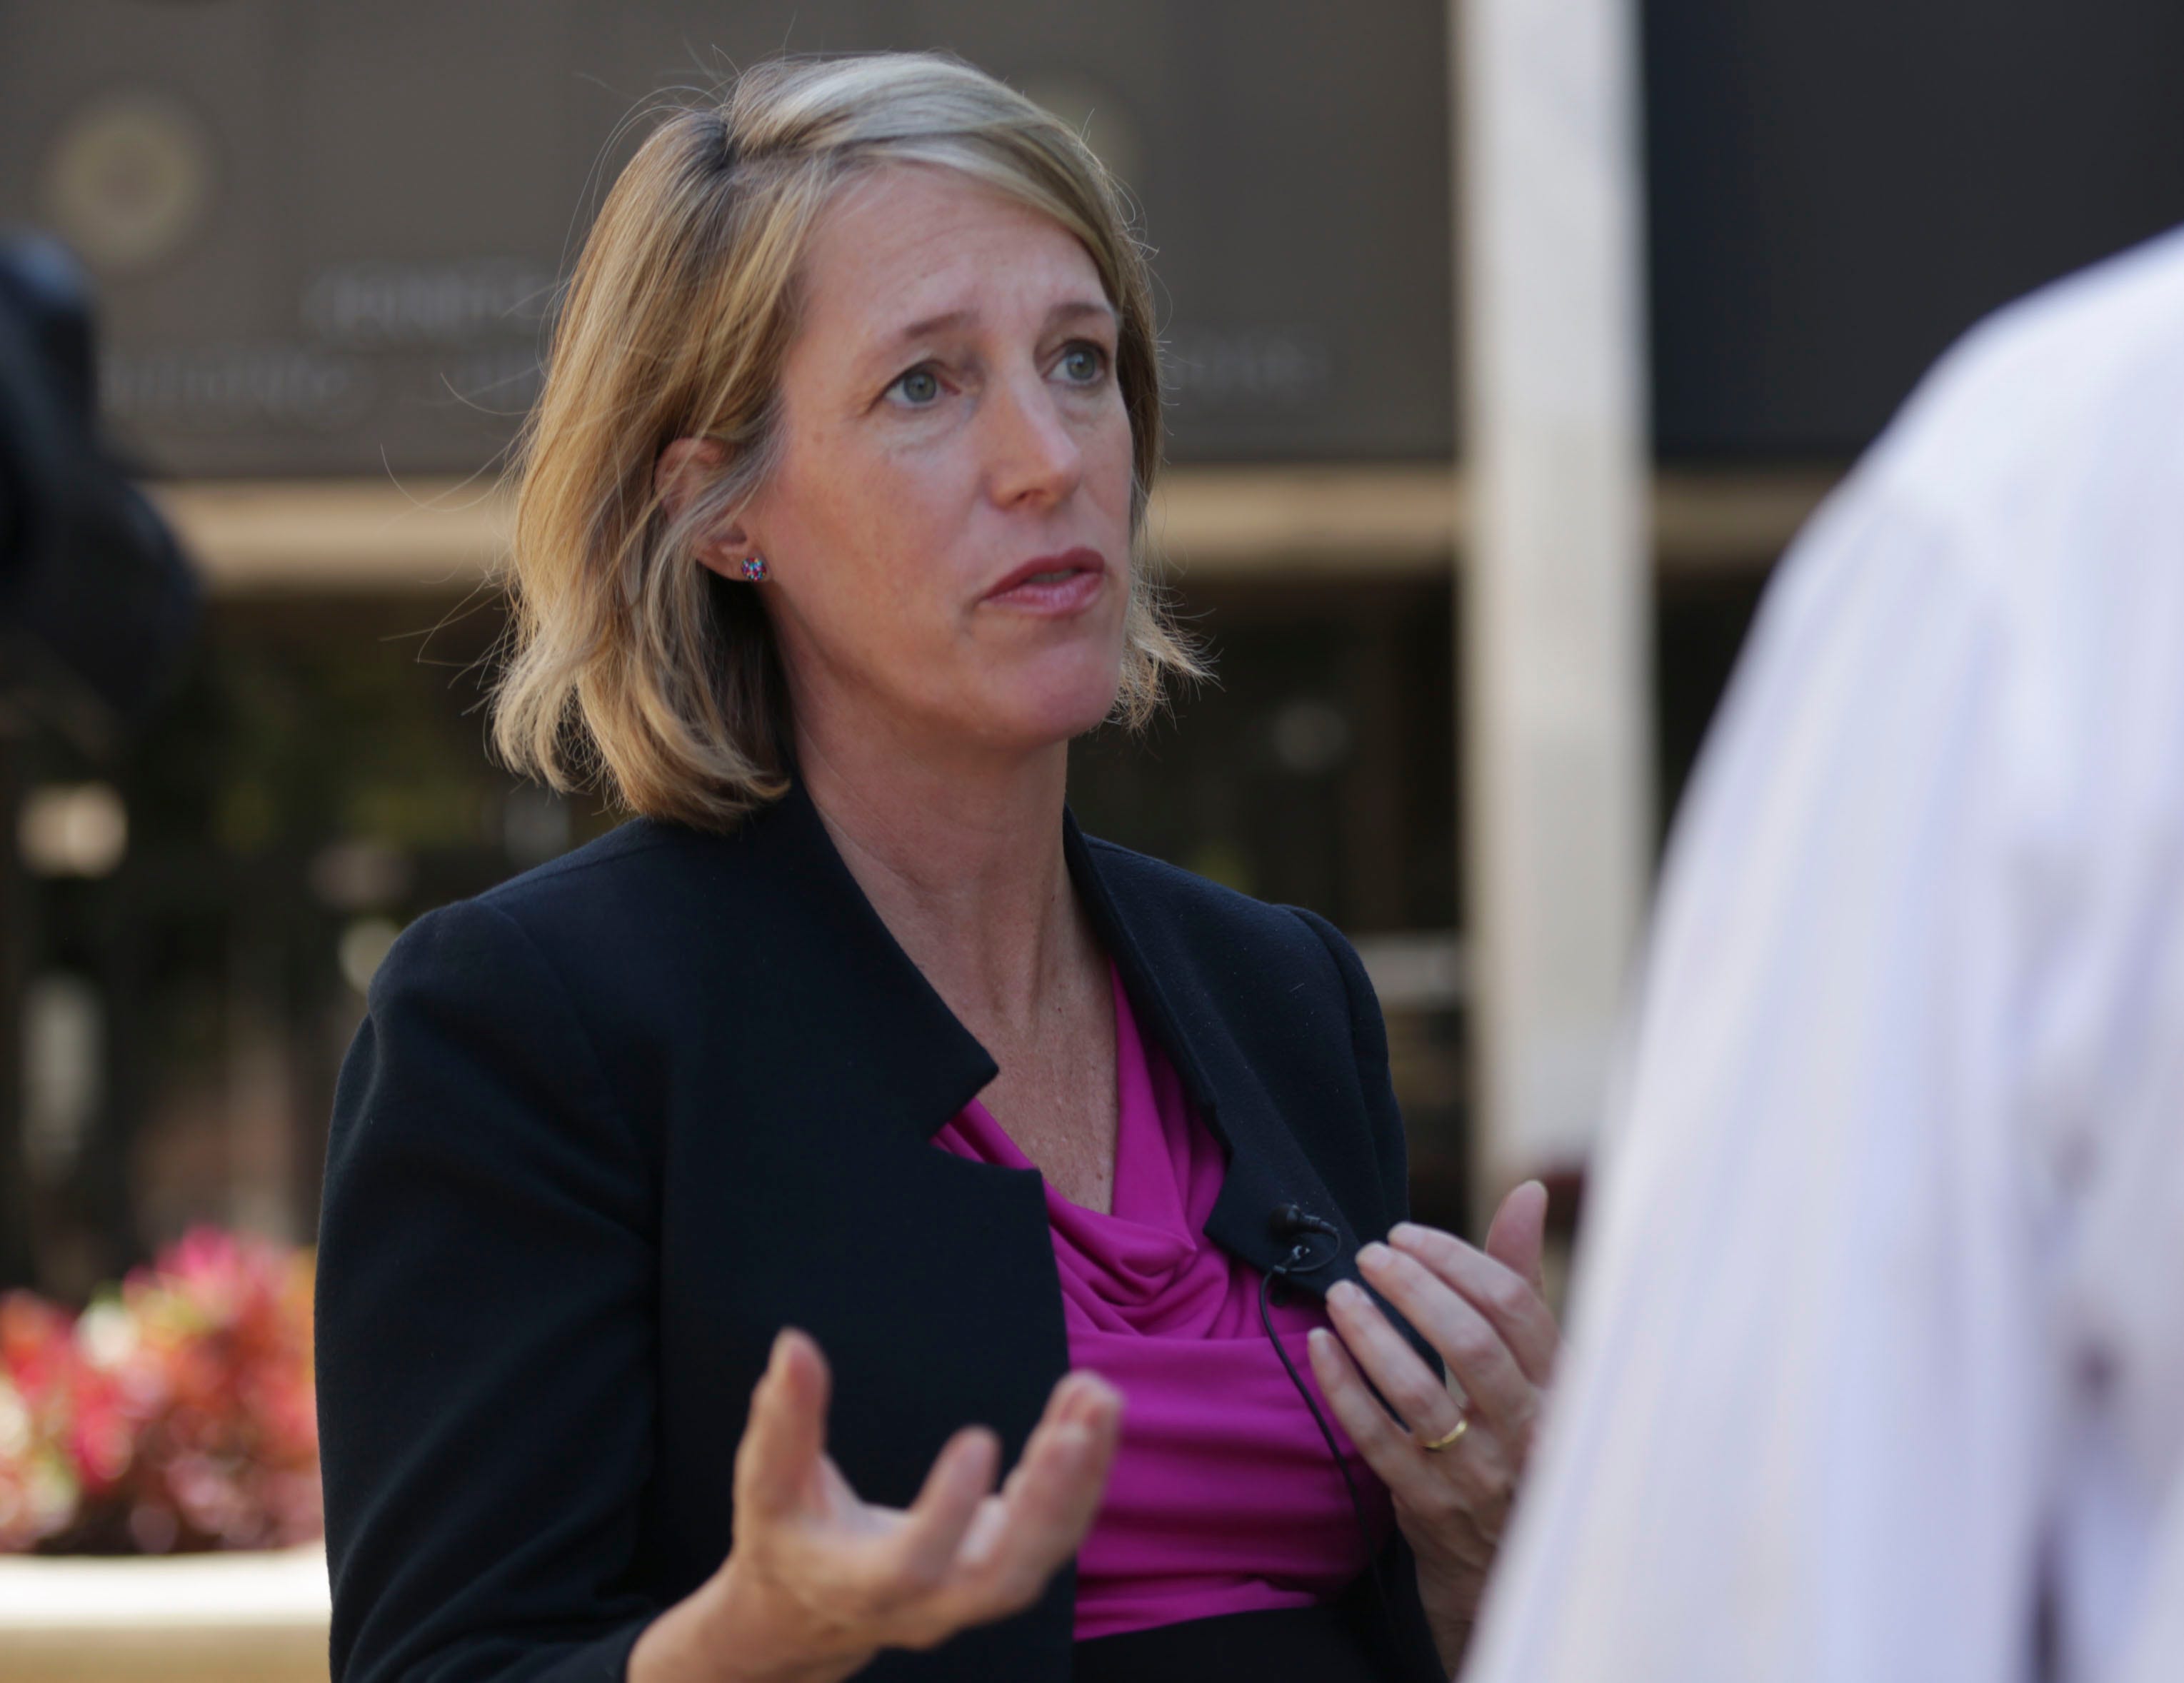 Zephyr Teachout, running for state attorney general, calls out rampant political corruption